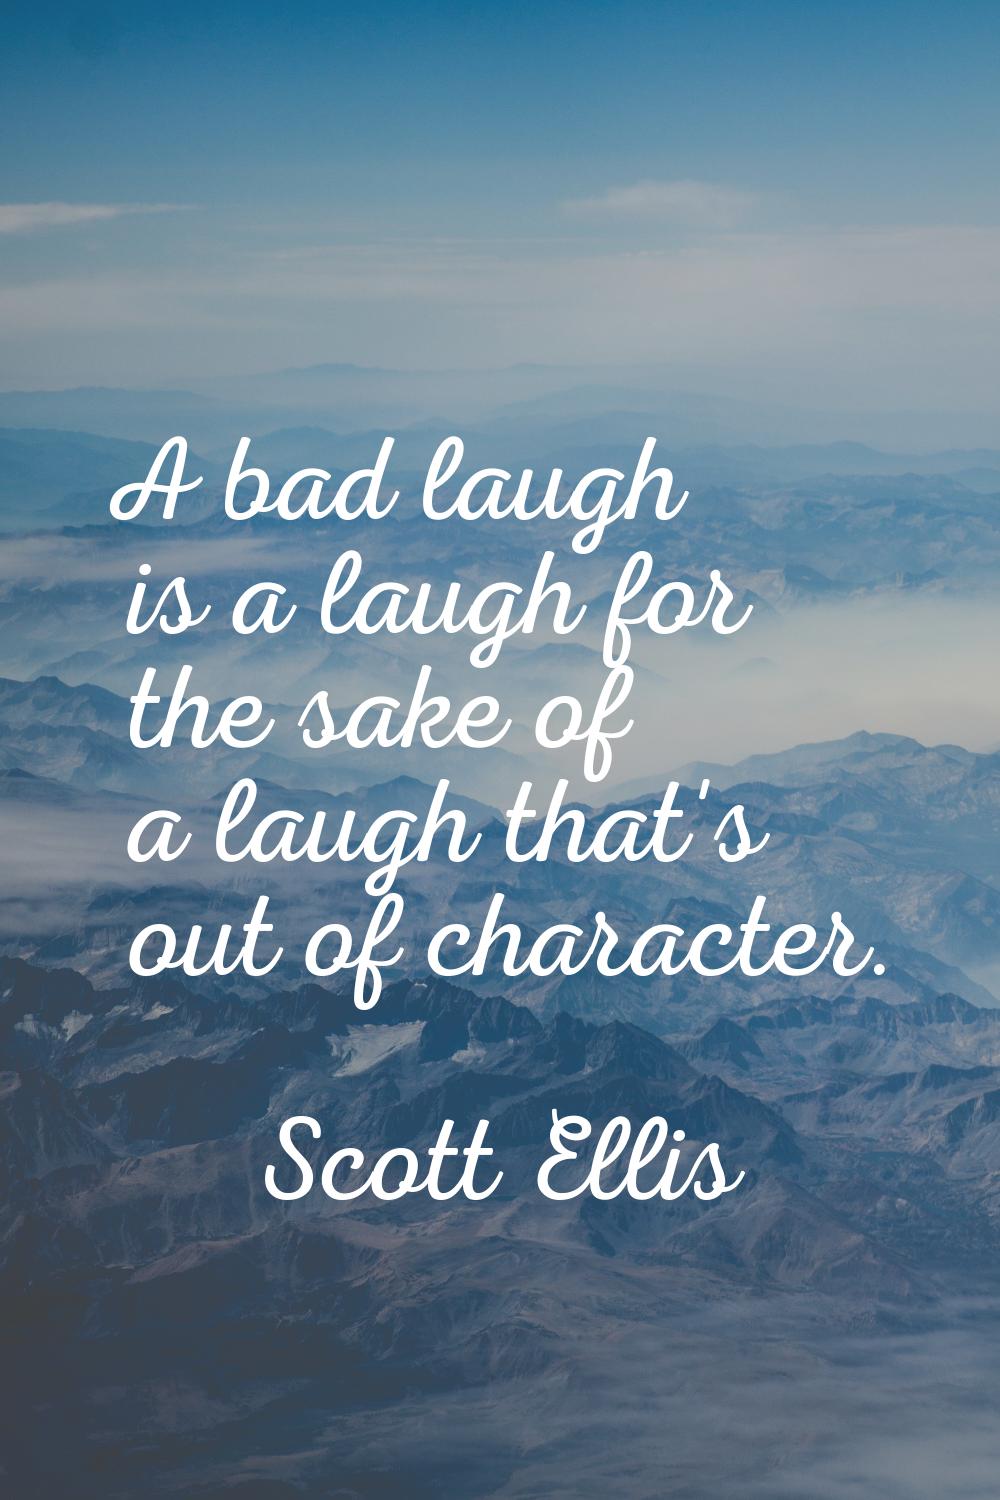 A bad laugh is a laugh for the sake of a laugh that's out of character.